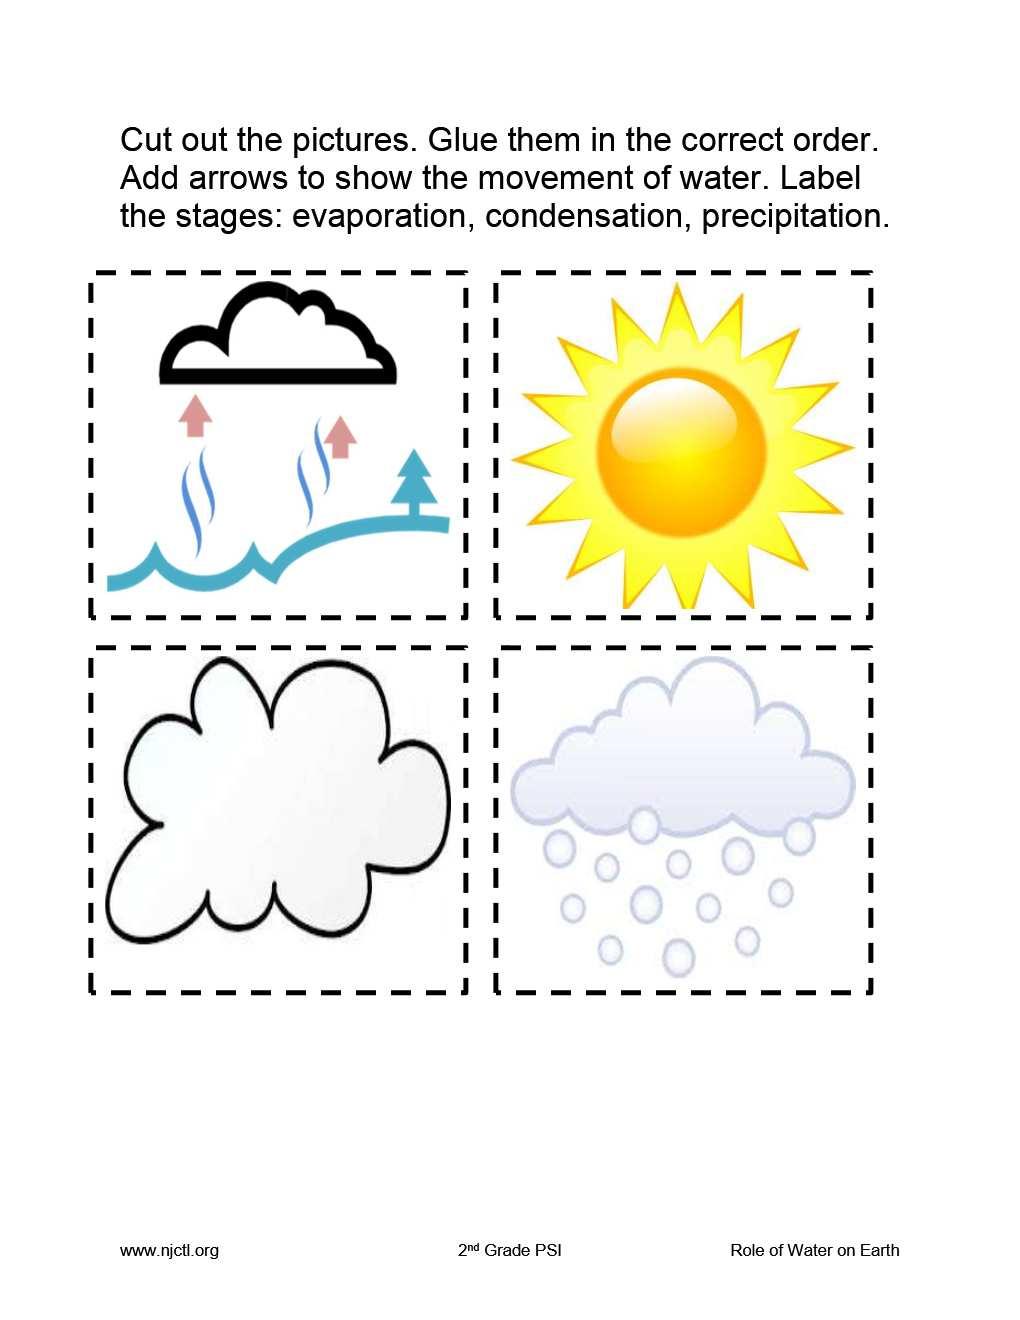 Slide 86 / 111 23 Which of the following shows the correct order of the water cycle?